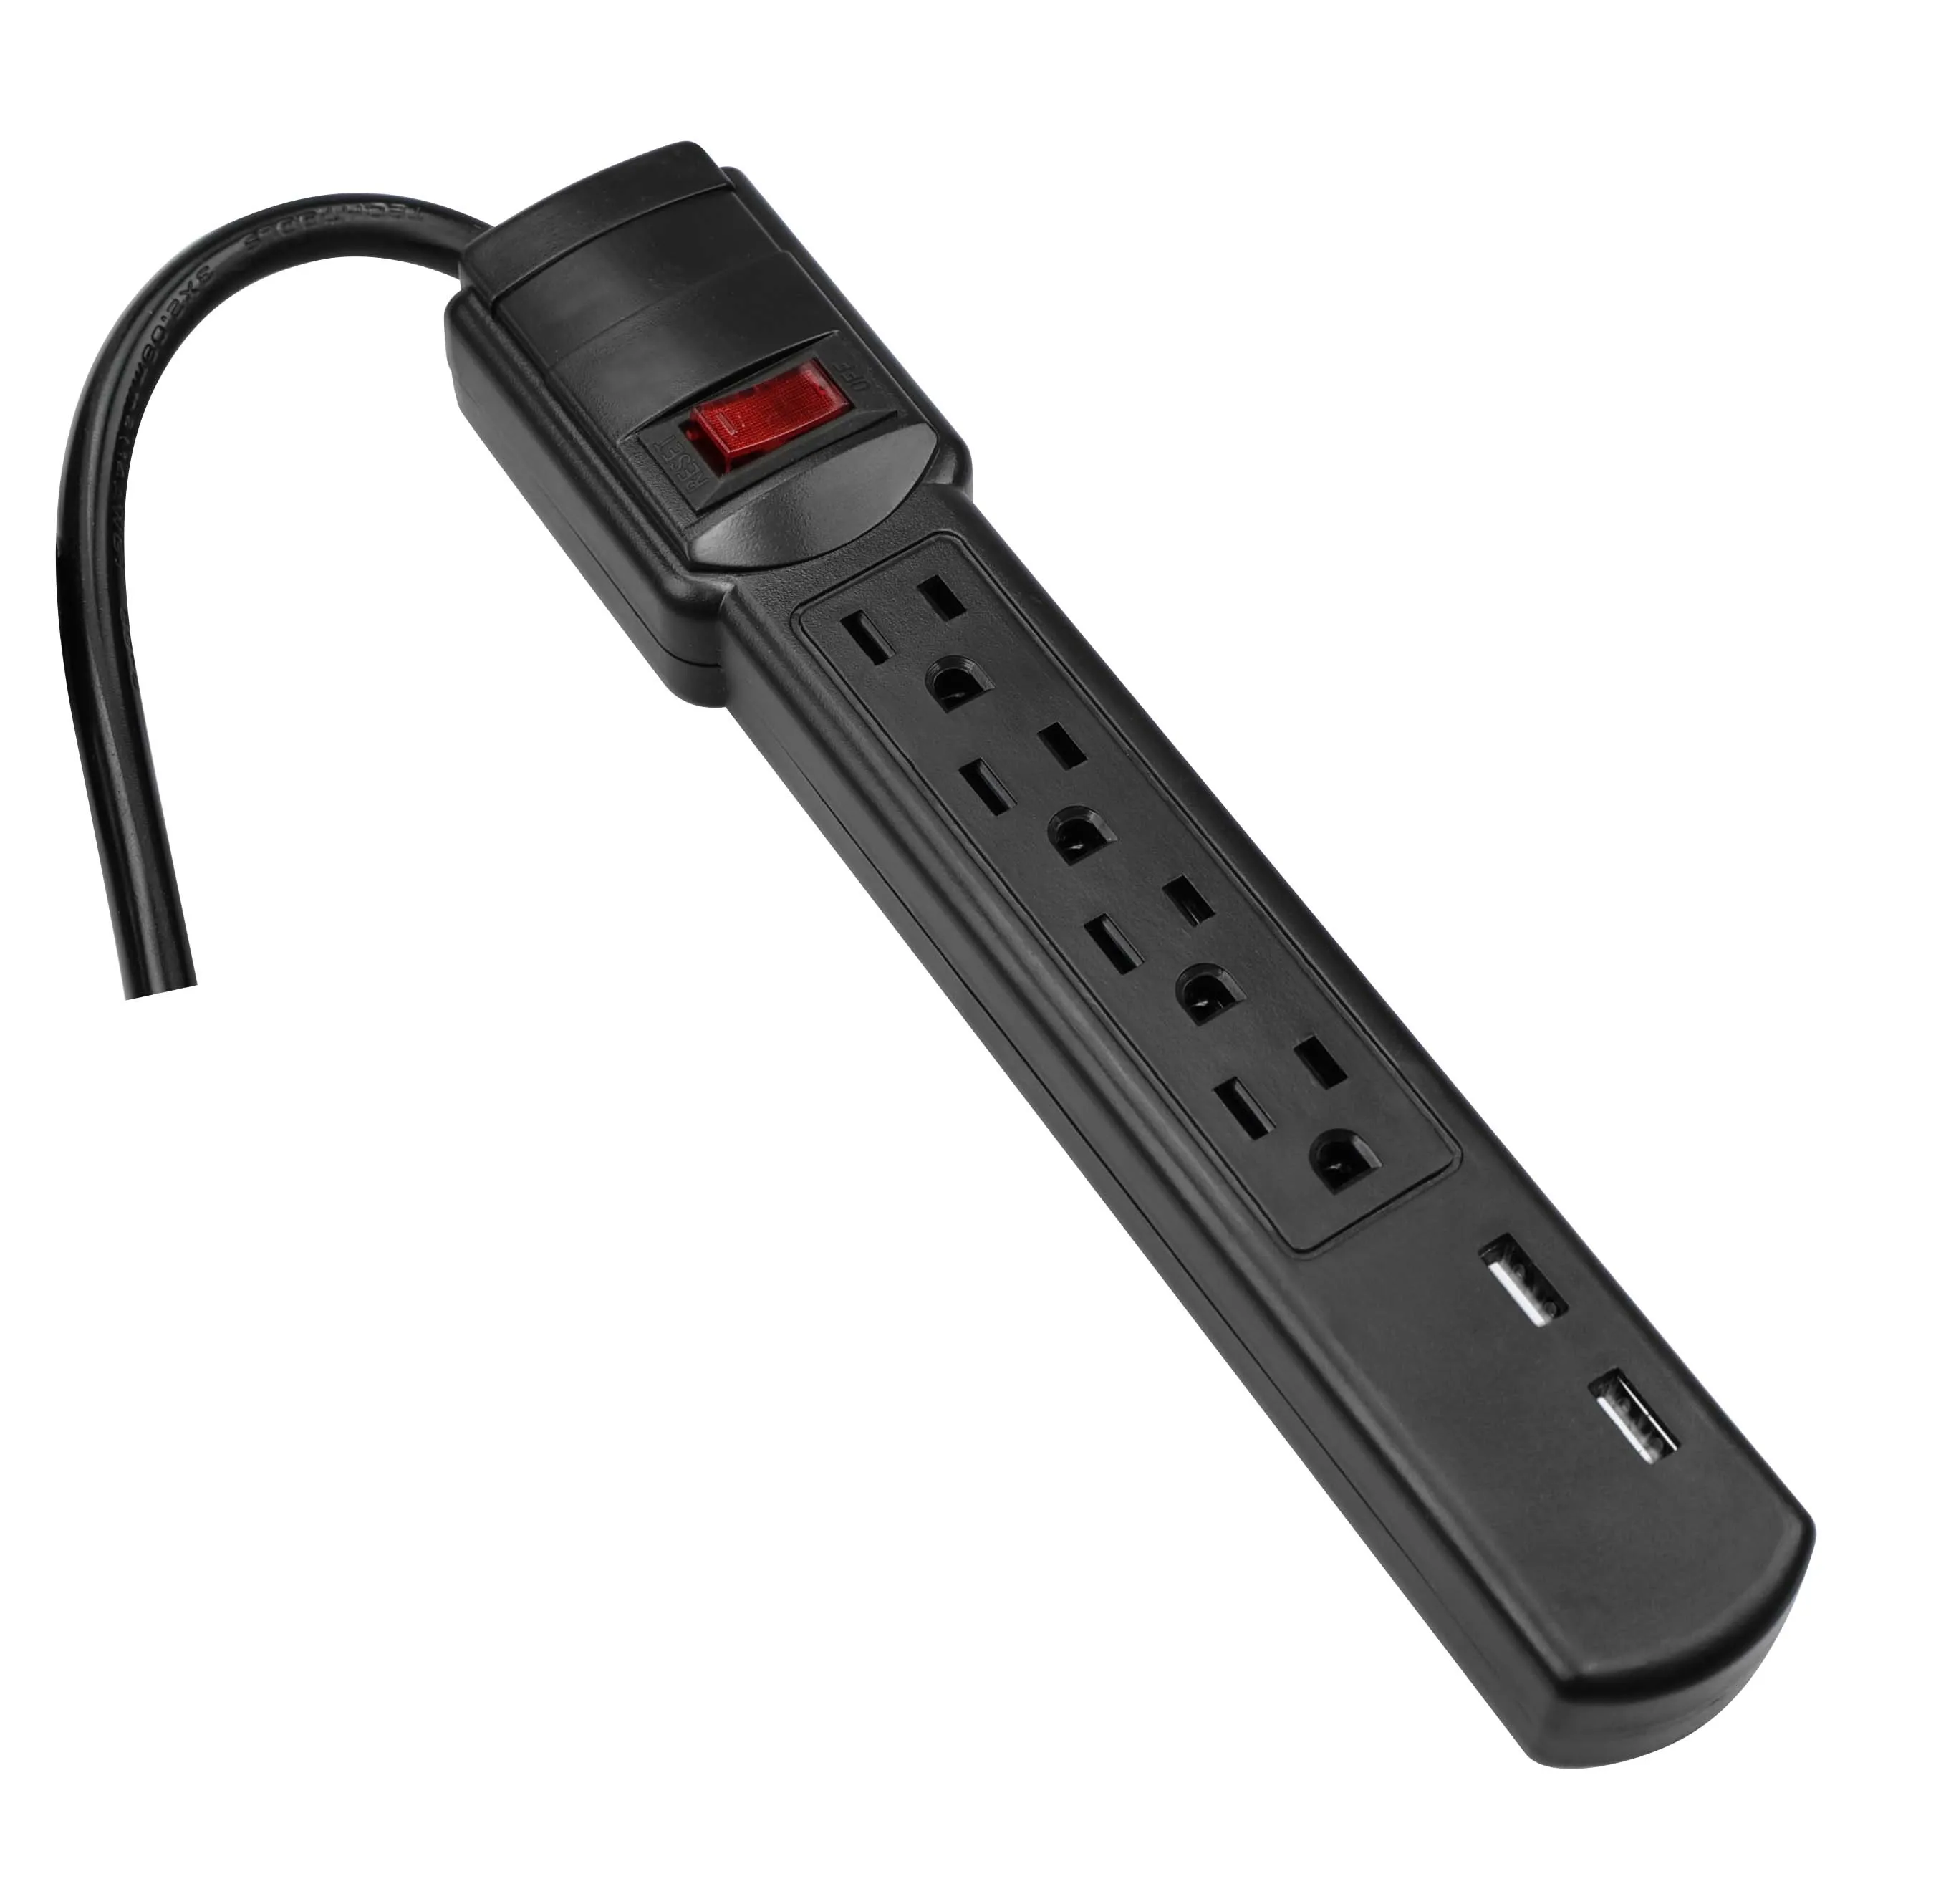 H10424 Power Strip Surge Protector 4 Widely Spaced Outlets with 2 USB Charging Ports and Customized Extension Cord 15A 1875W